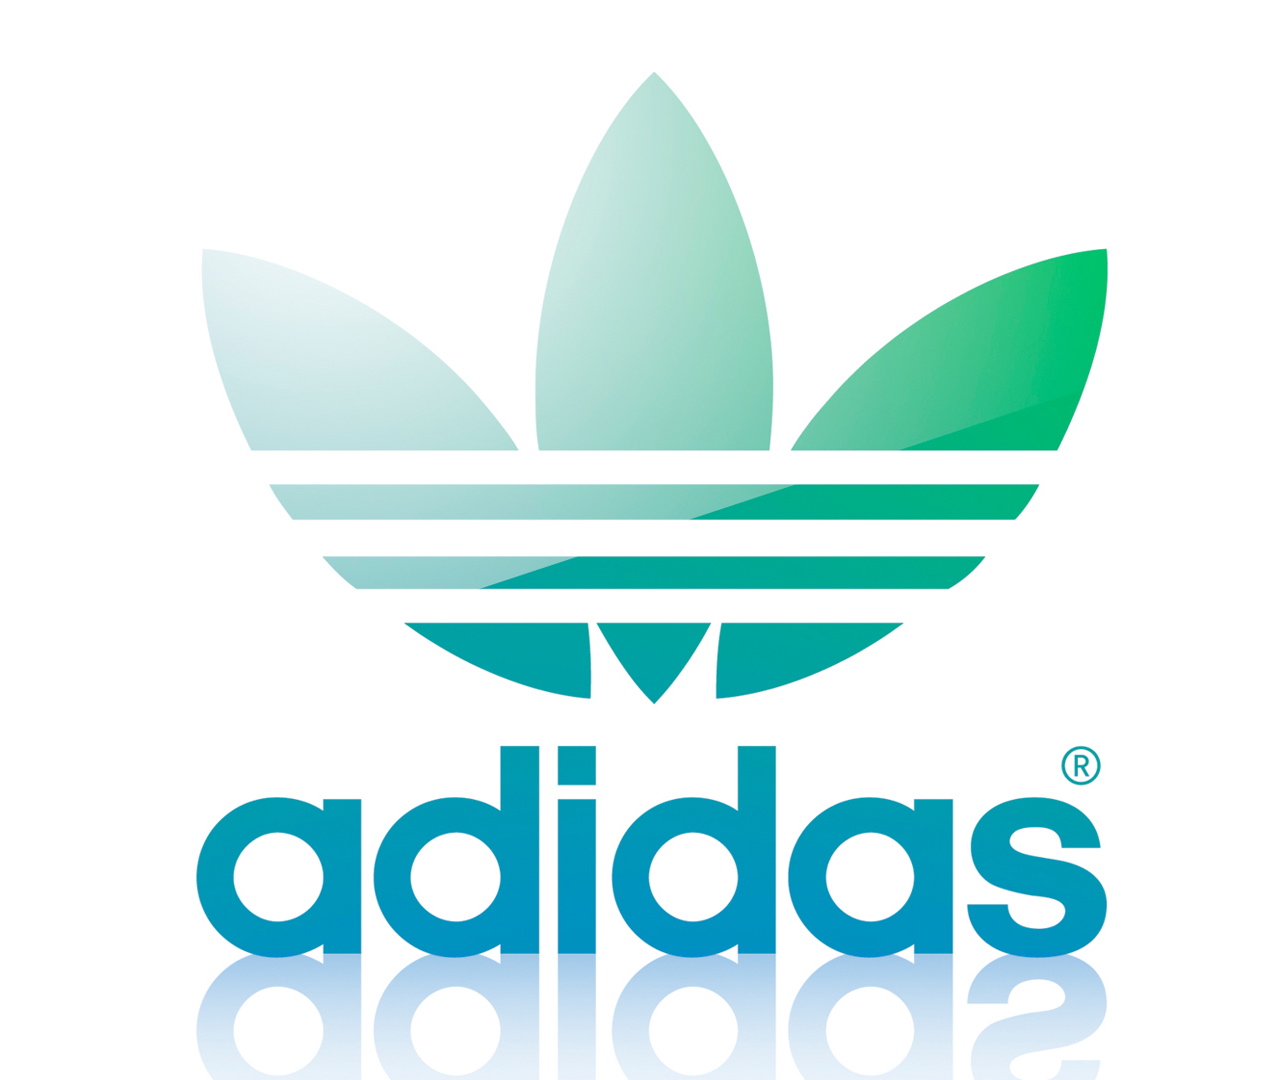 It's all about Adidas